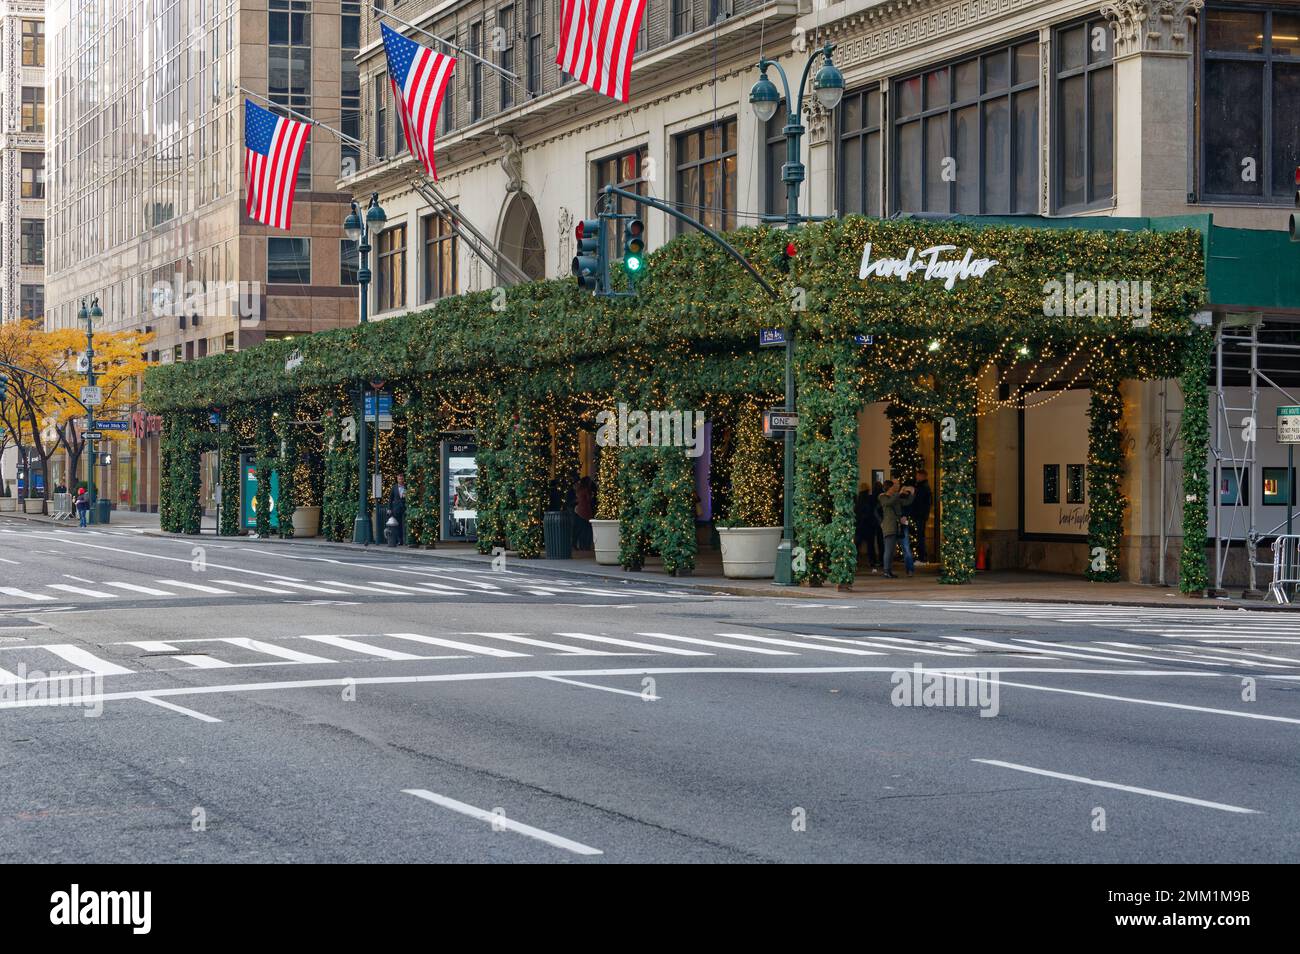 NYC Archive: Lord & Taylor Fifth Avenue department store, dressed for Christmas, 2016. Amazon.com bought the shopping landmark, converted to offices. Stock Photo